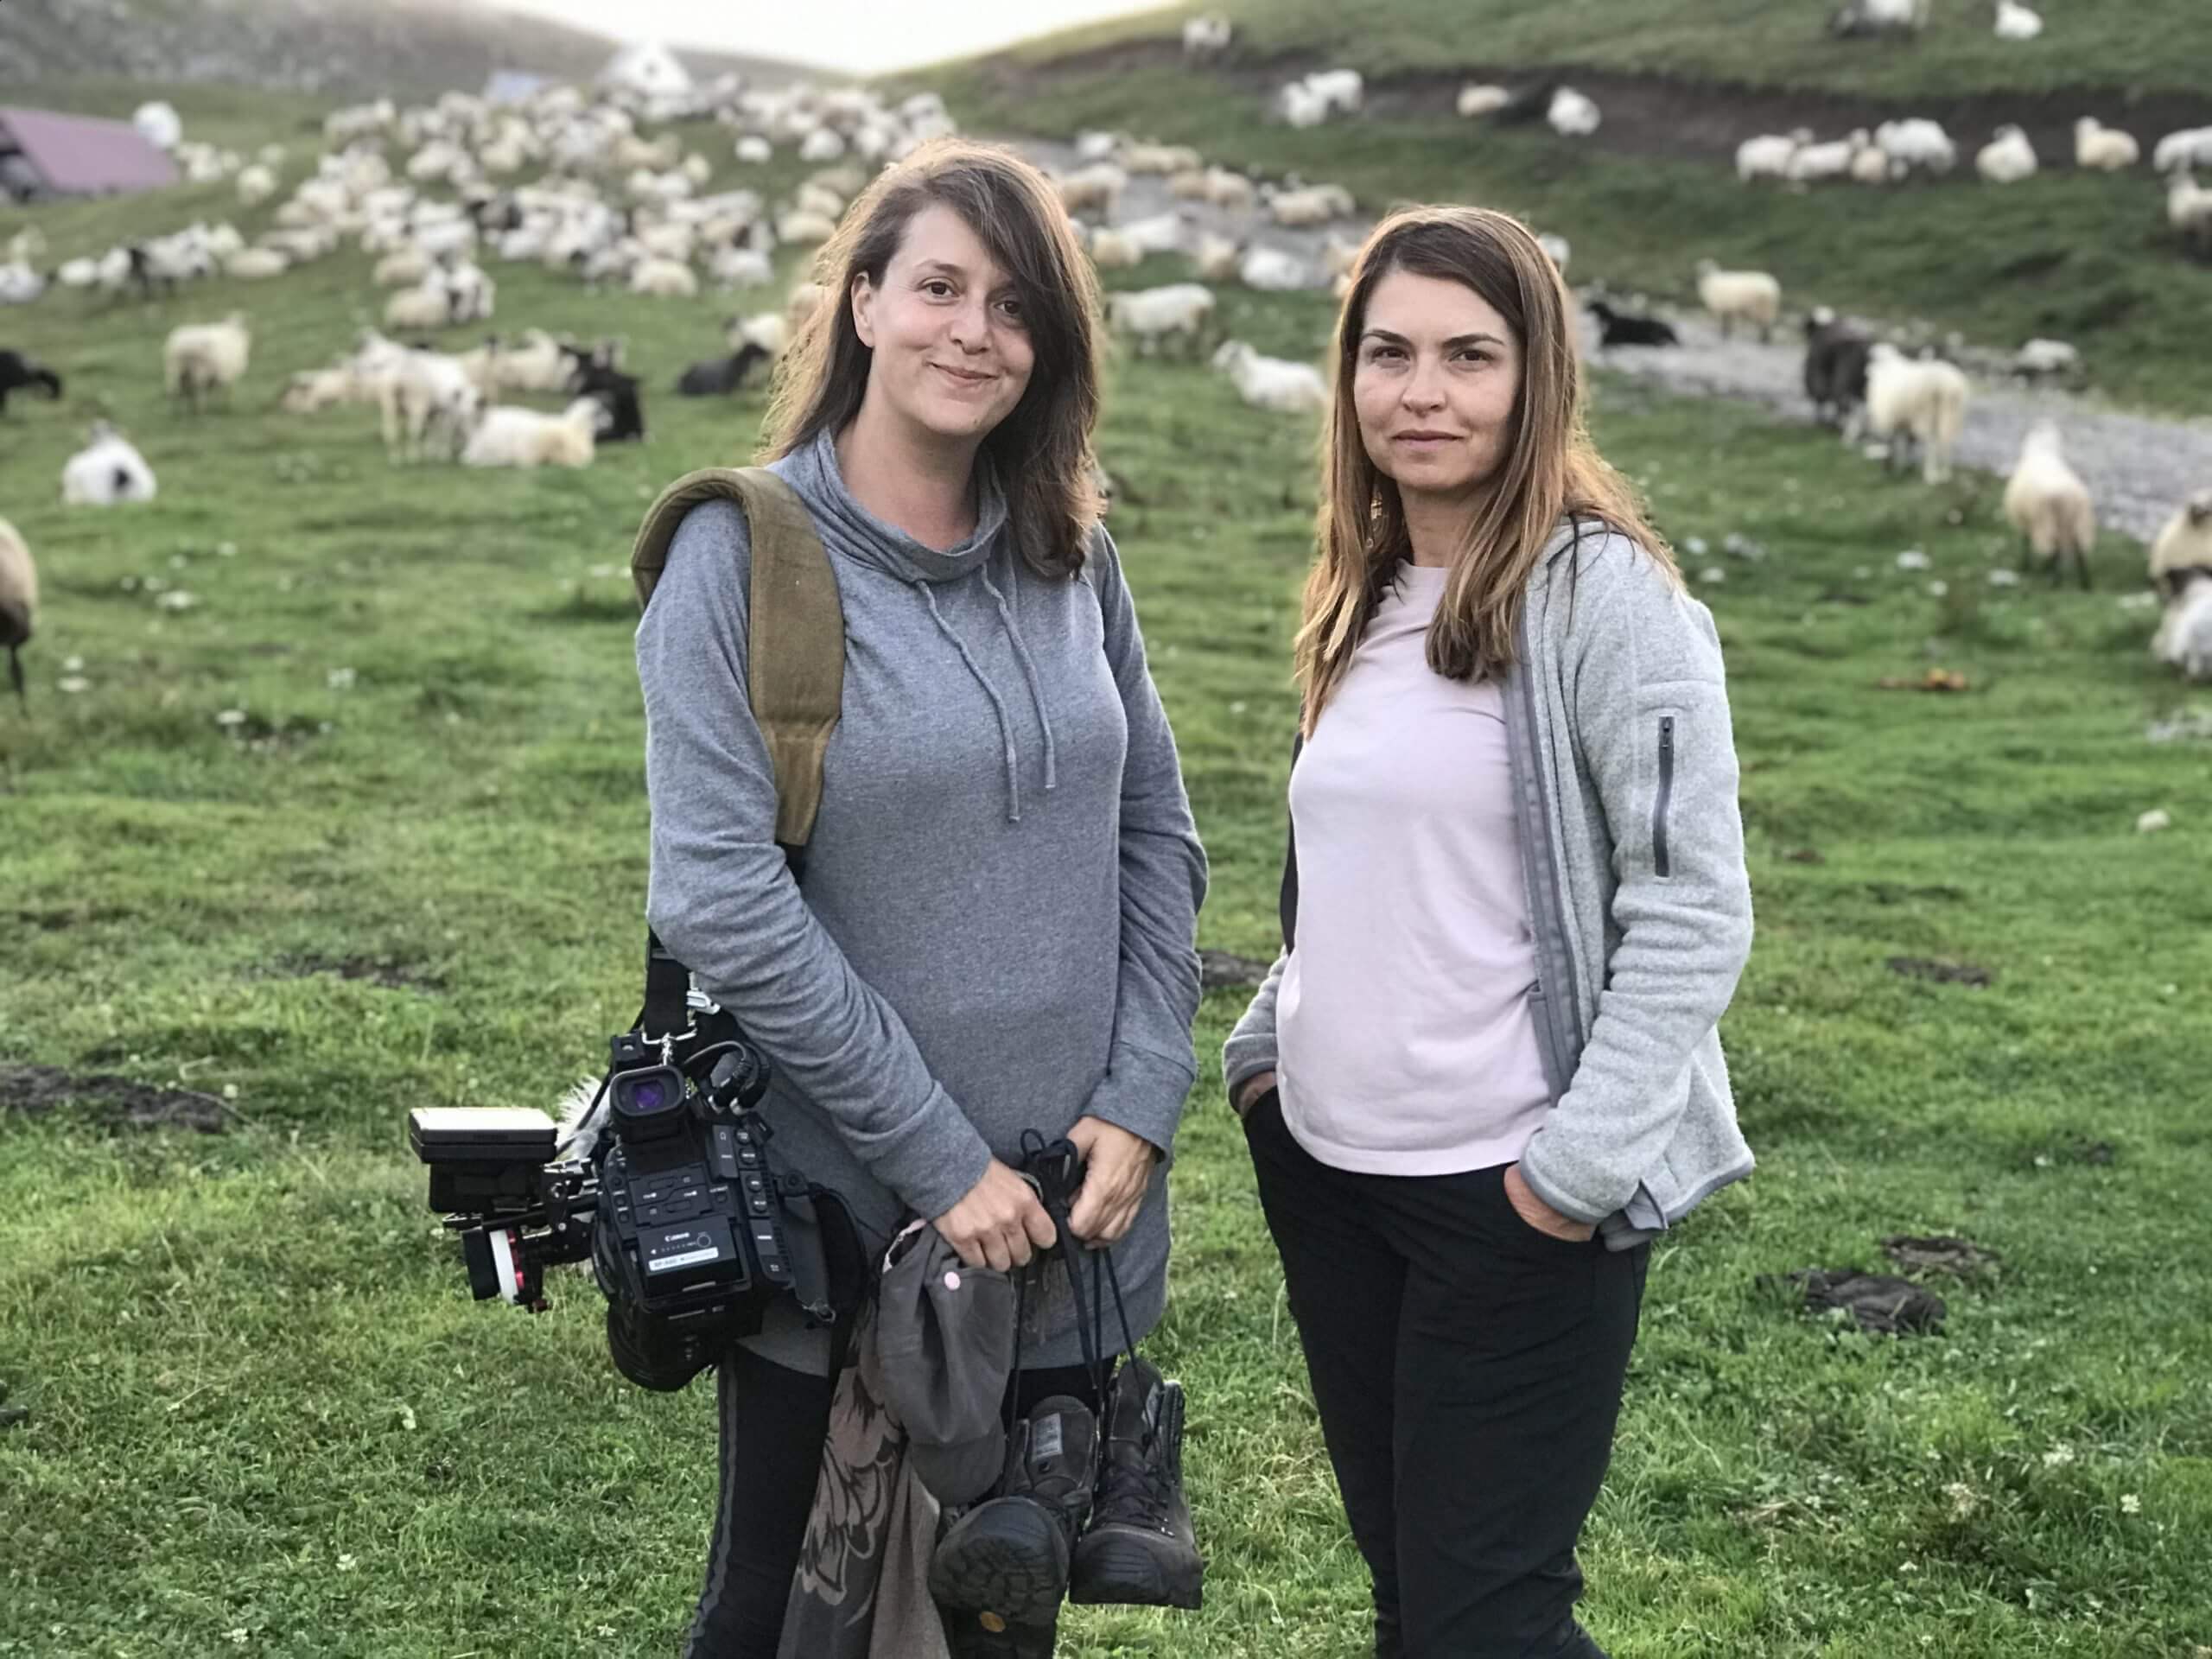 A production still from The Last Nomads. Two people stand in a field looking directly at the camera. Behind them are a patch of green grass and many sheep roaming around. One of them has a large digital camera lung over their shoulder and is holding additional camera equipment.